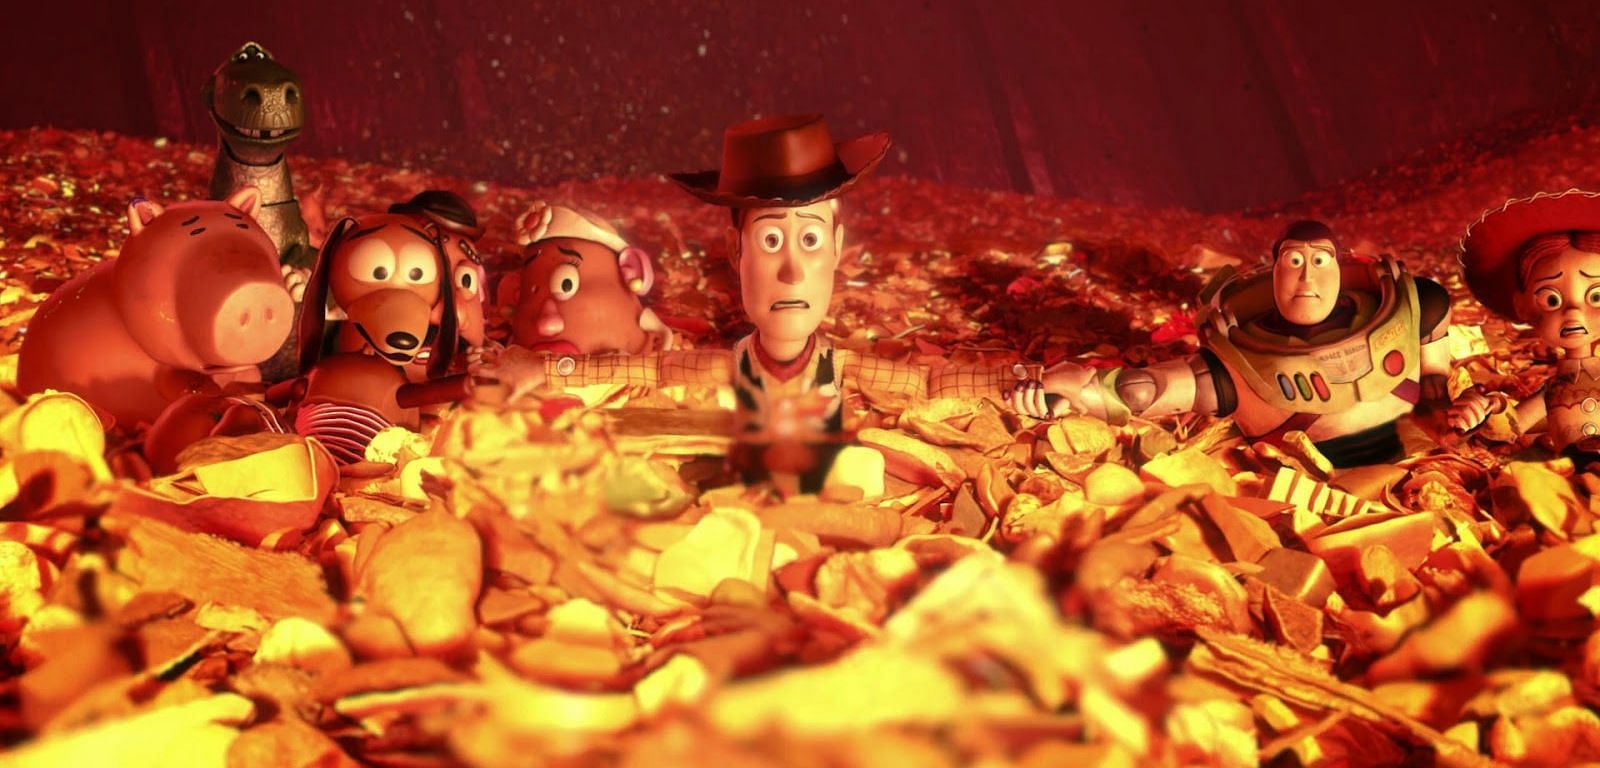 Woody and the gang in peril (Image via Disney)